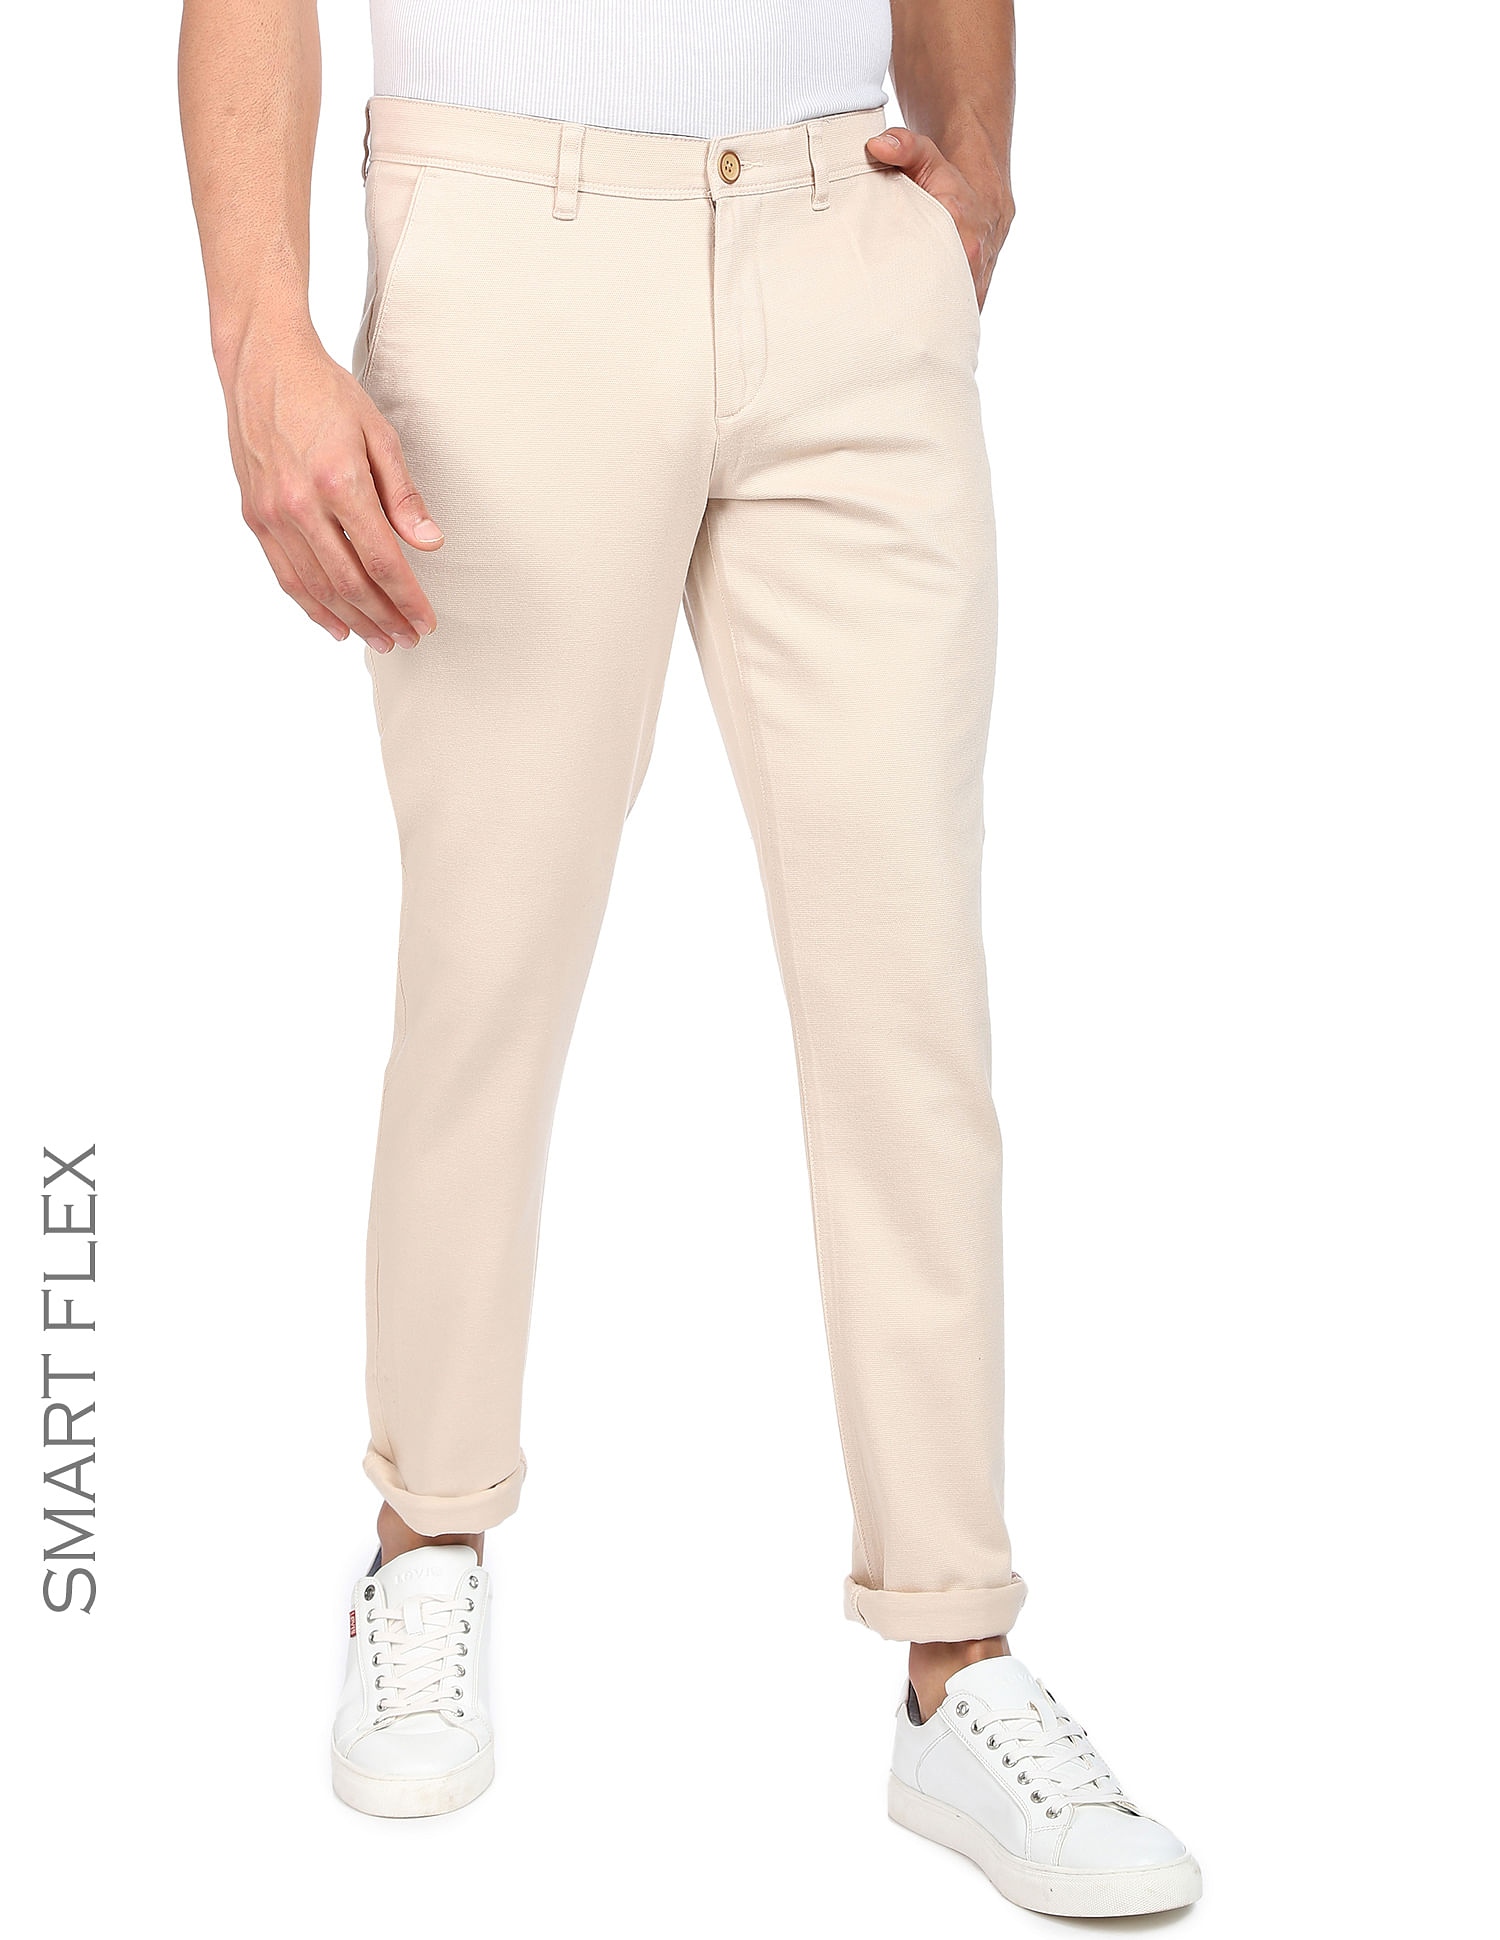 Shop Athletic Fit Chino Pants for Men | Slim-Fit Tapered Chinos